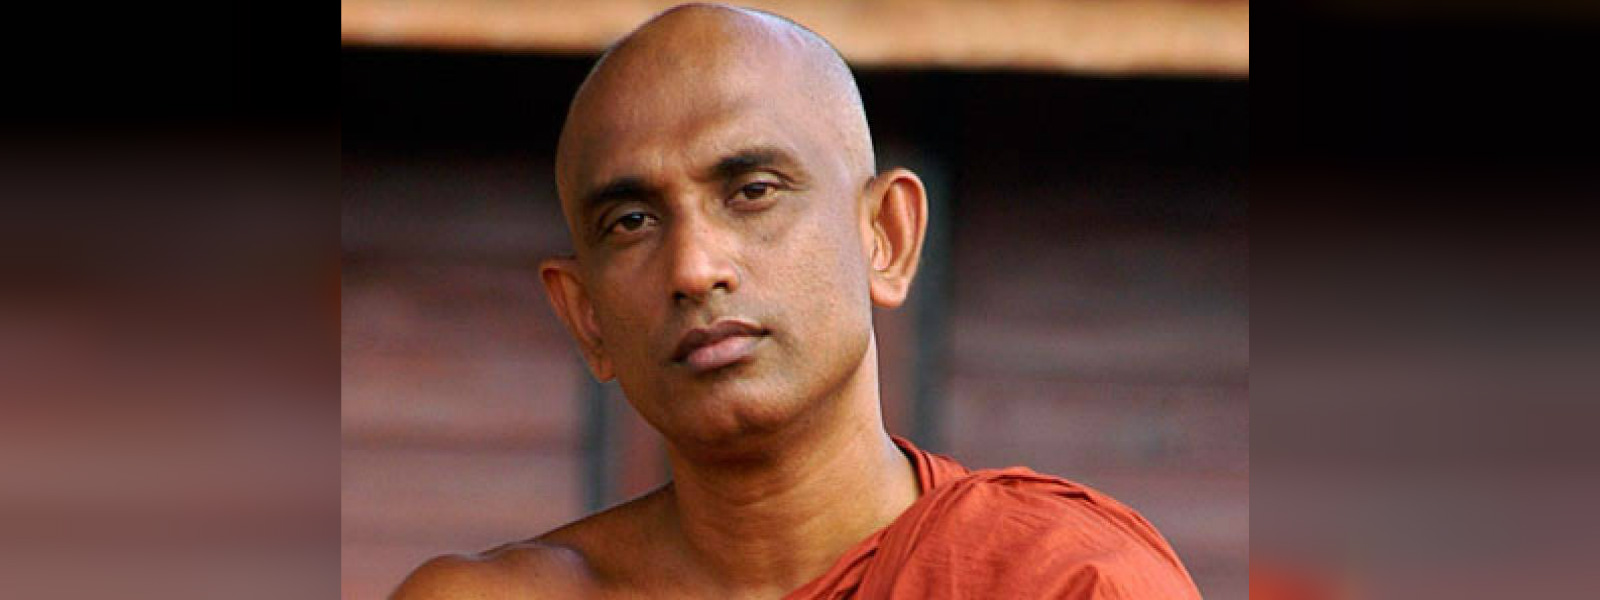 Rathana Thero to work for President's vision